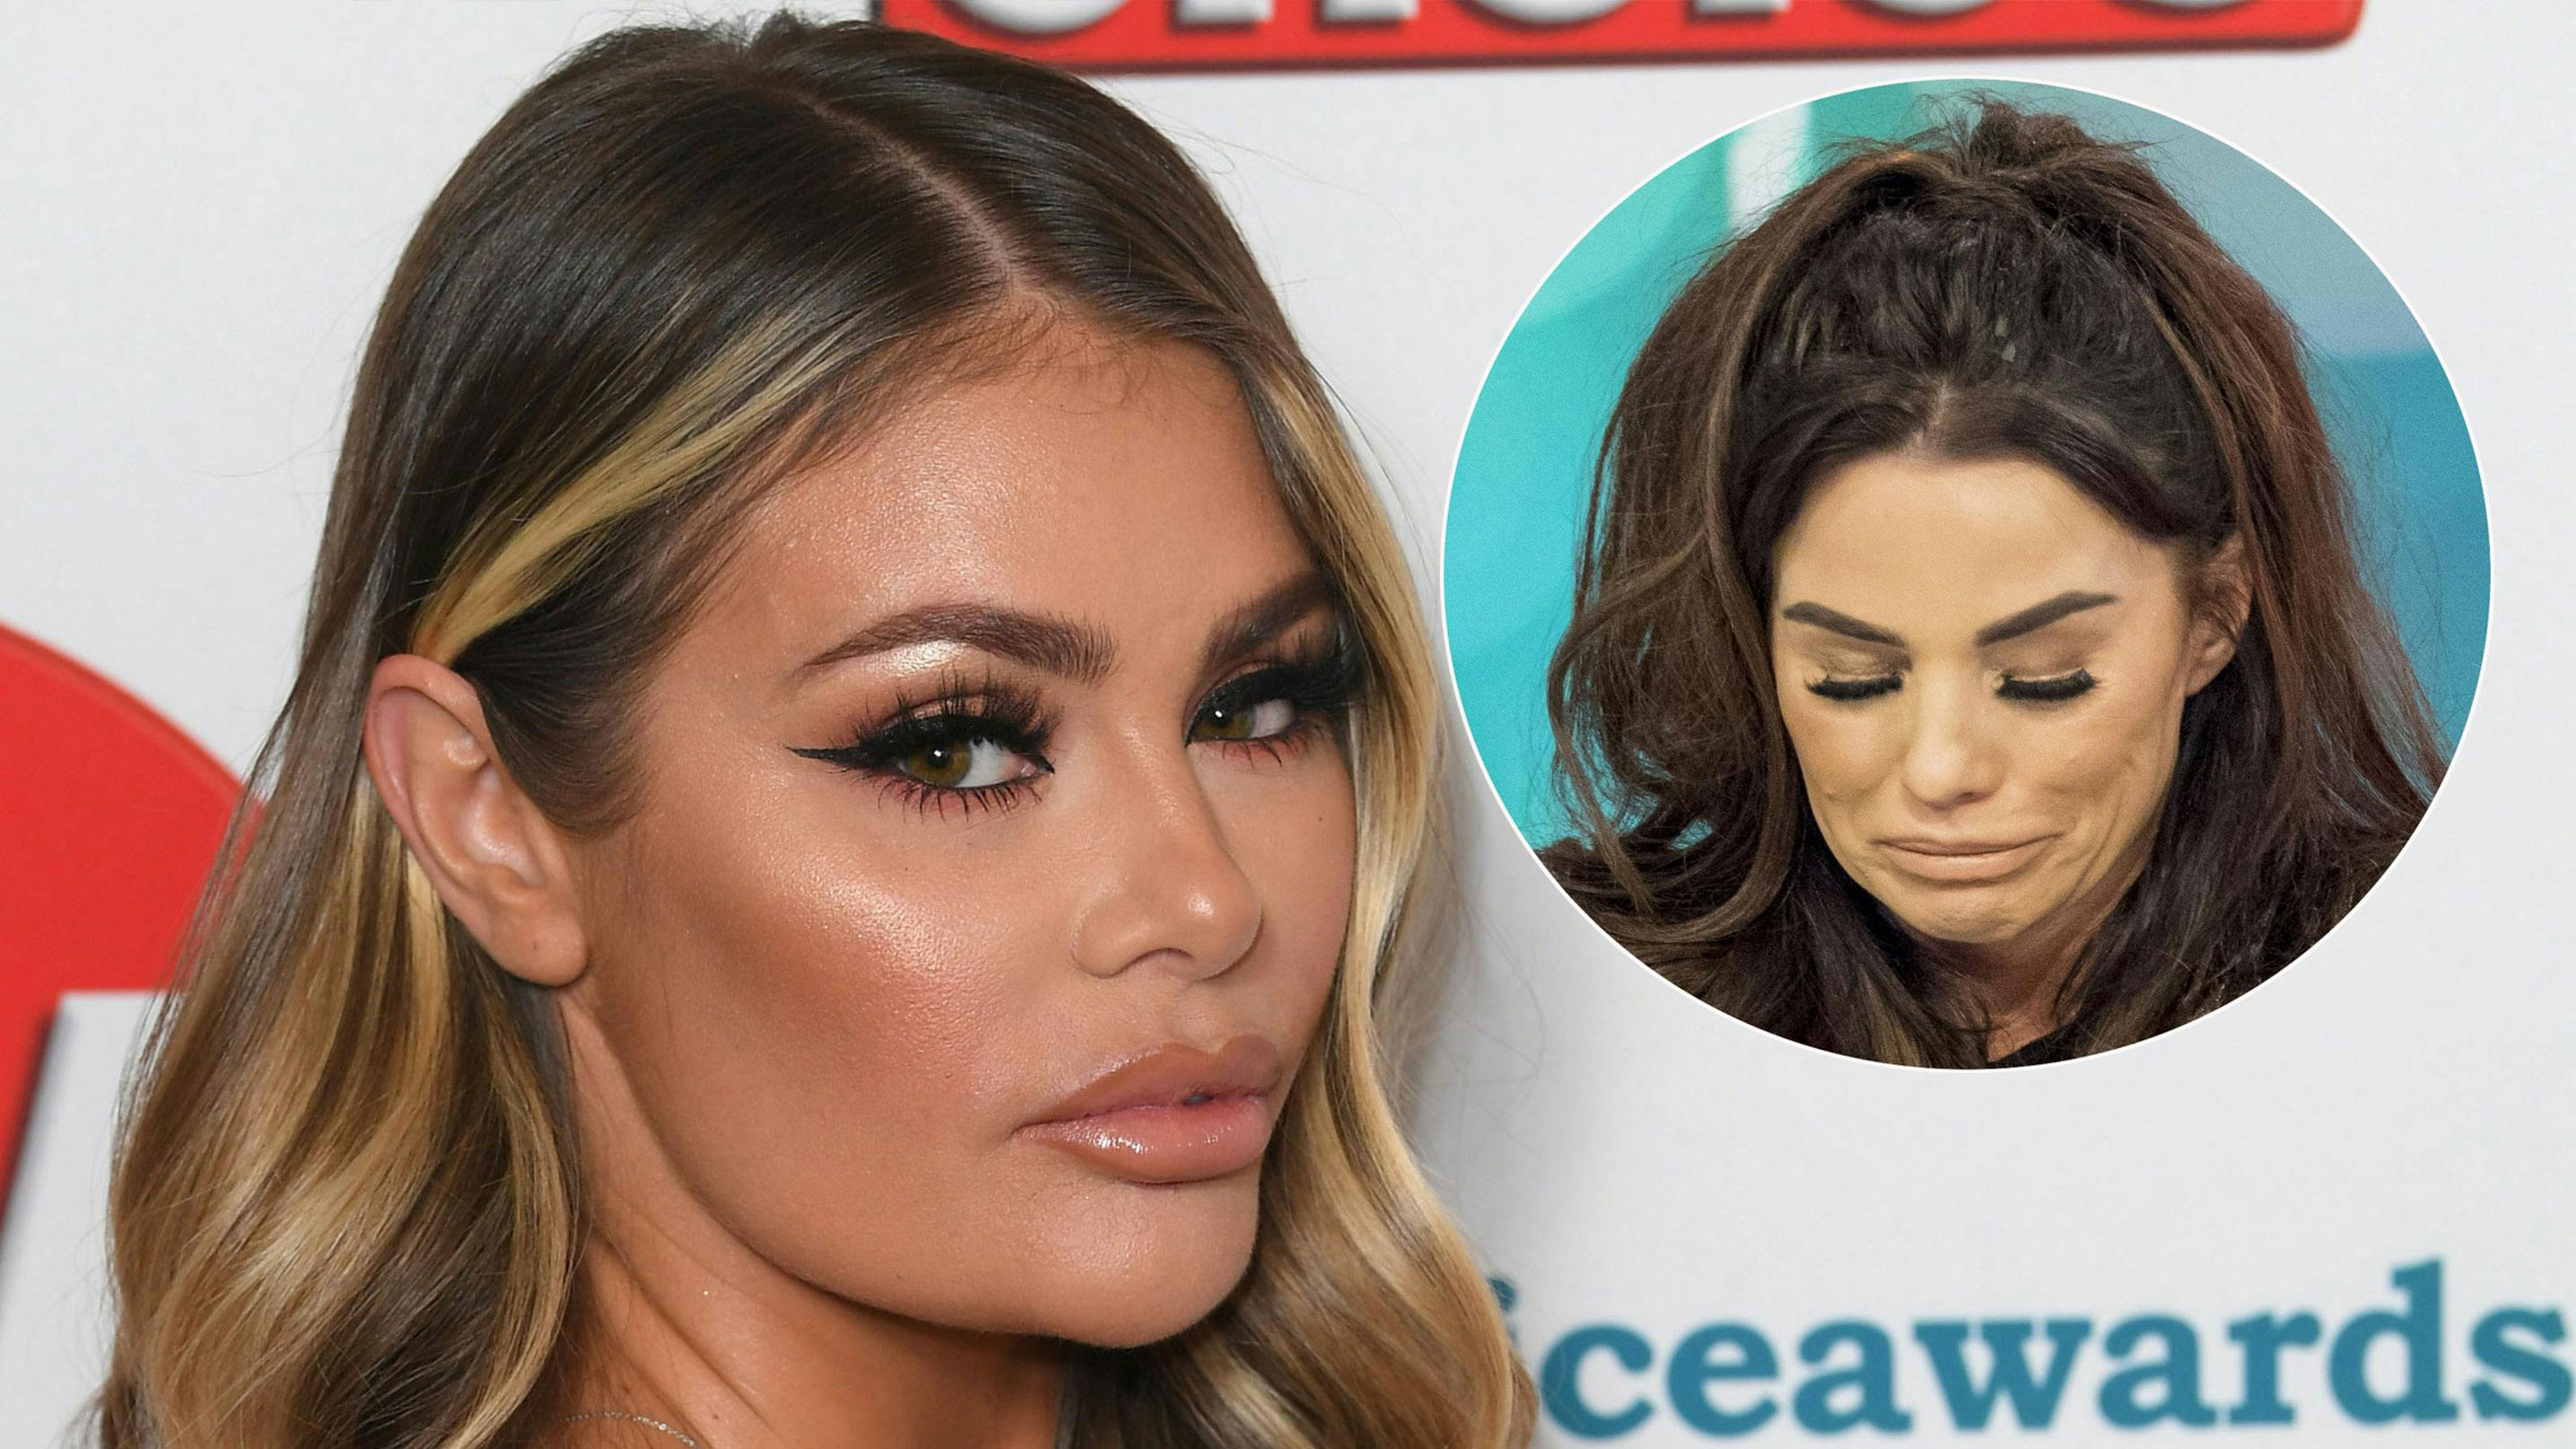 Chloe Sims I worry about Katie Price photo